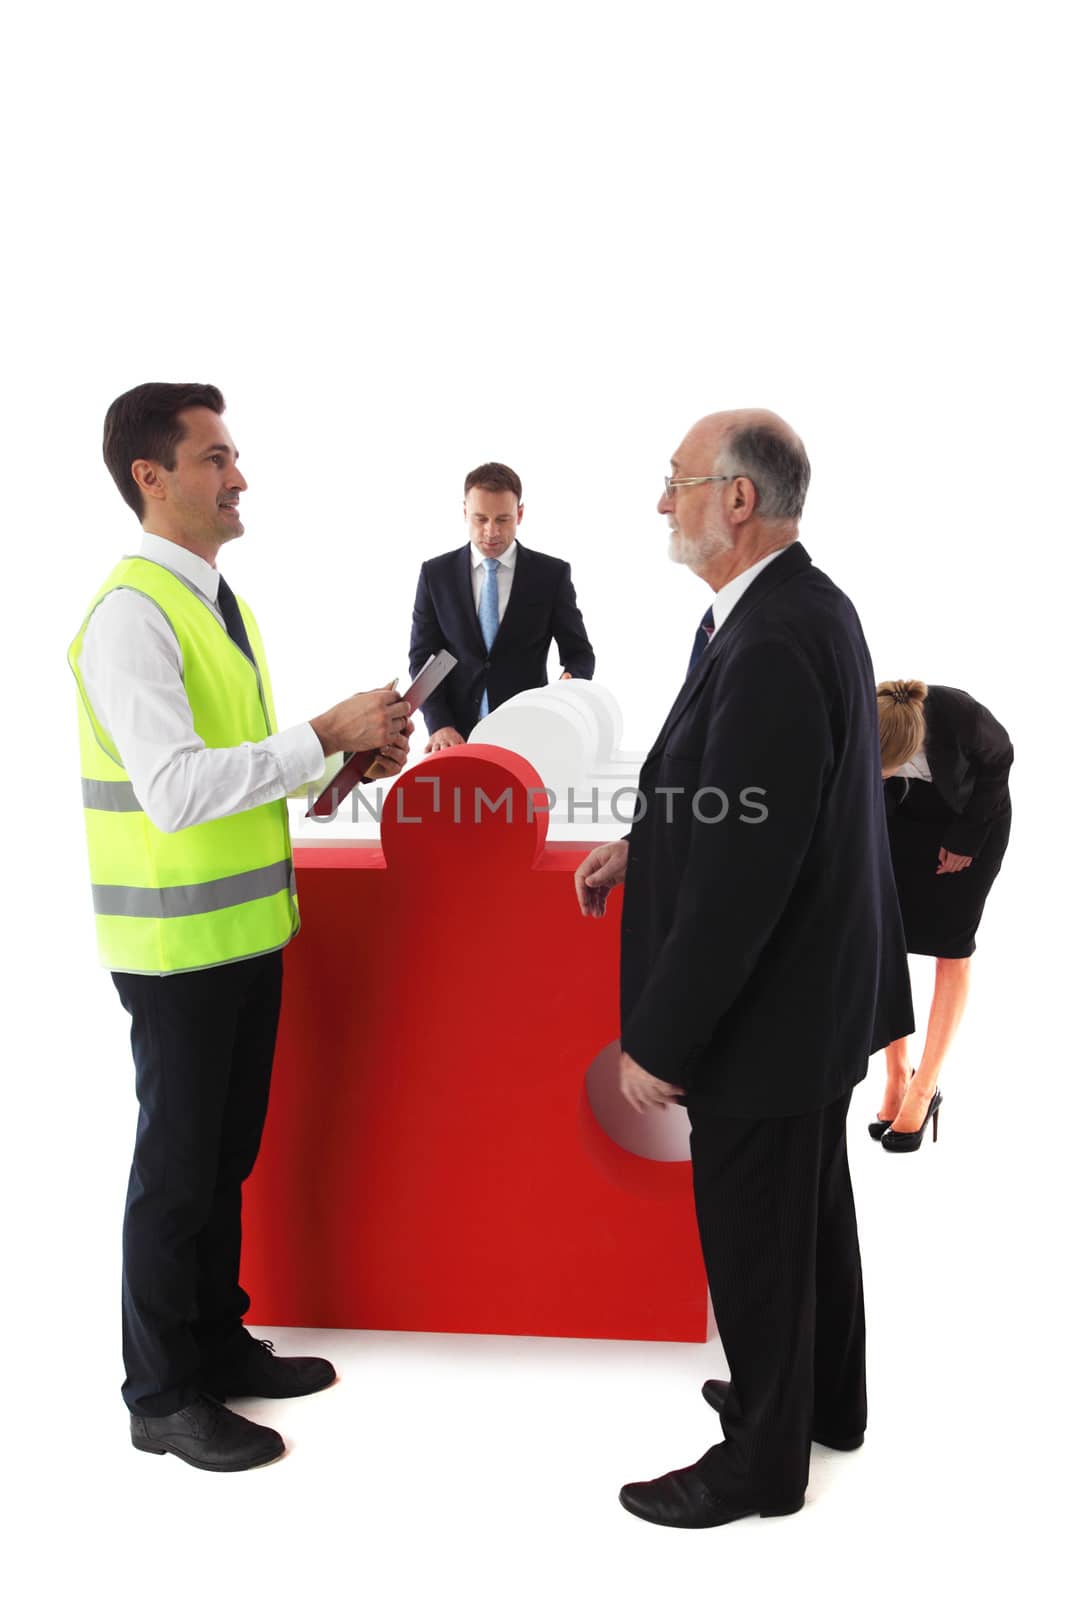 Business team receiving big puzzle pieces and signing delivery document, problem solution concept, isolated on white background